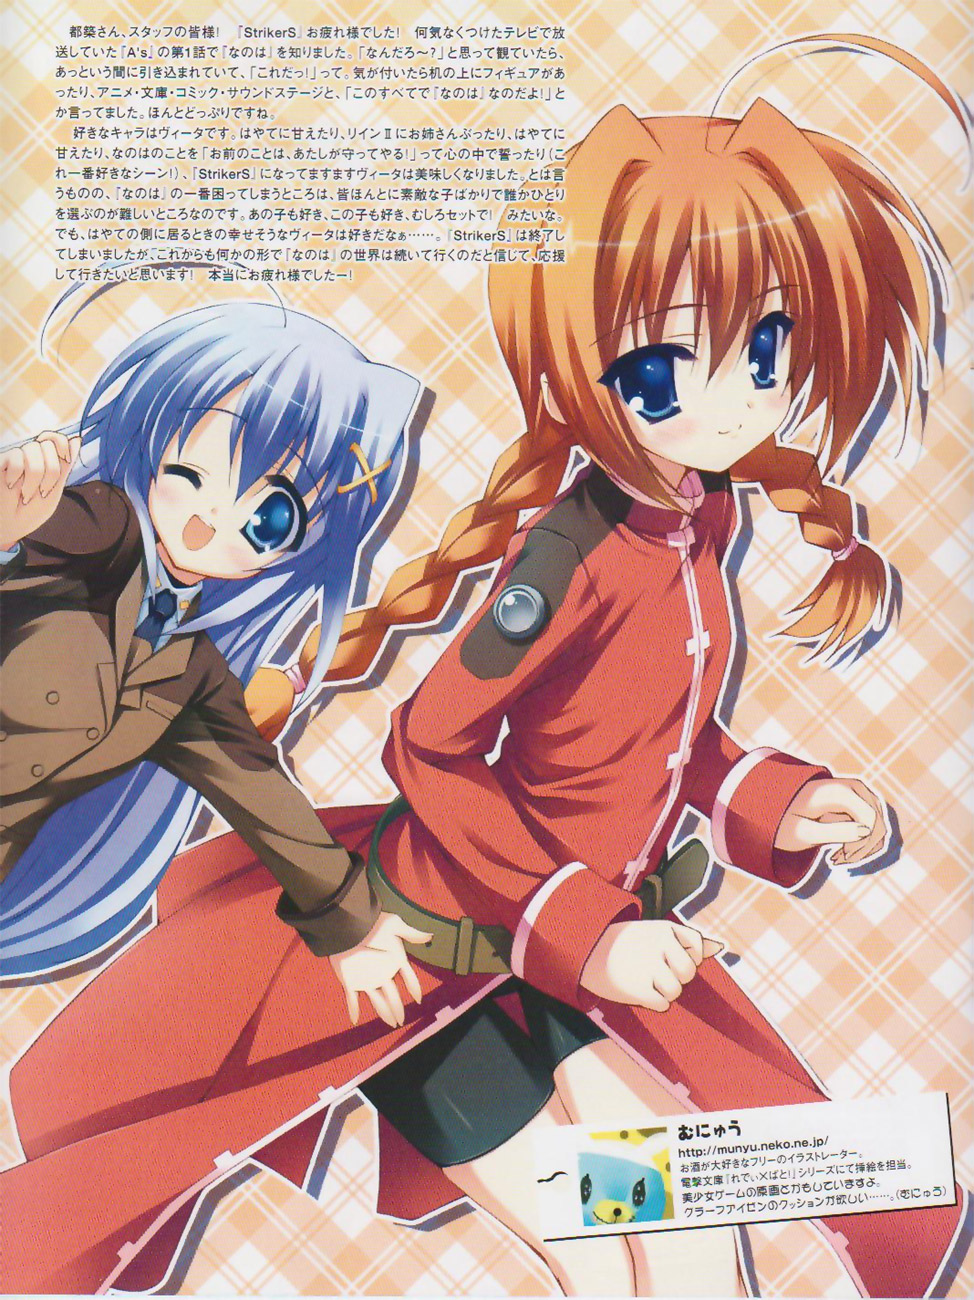 Tribute to Lyrical Nanoha image by Type-Moon